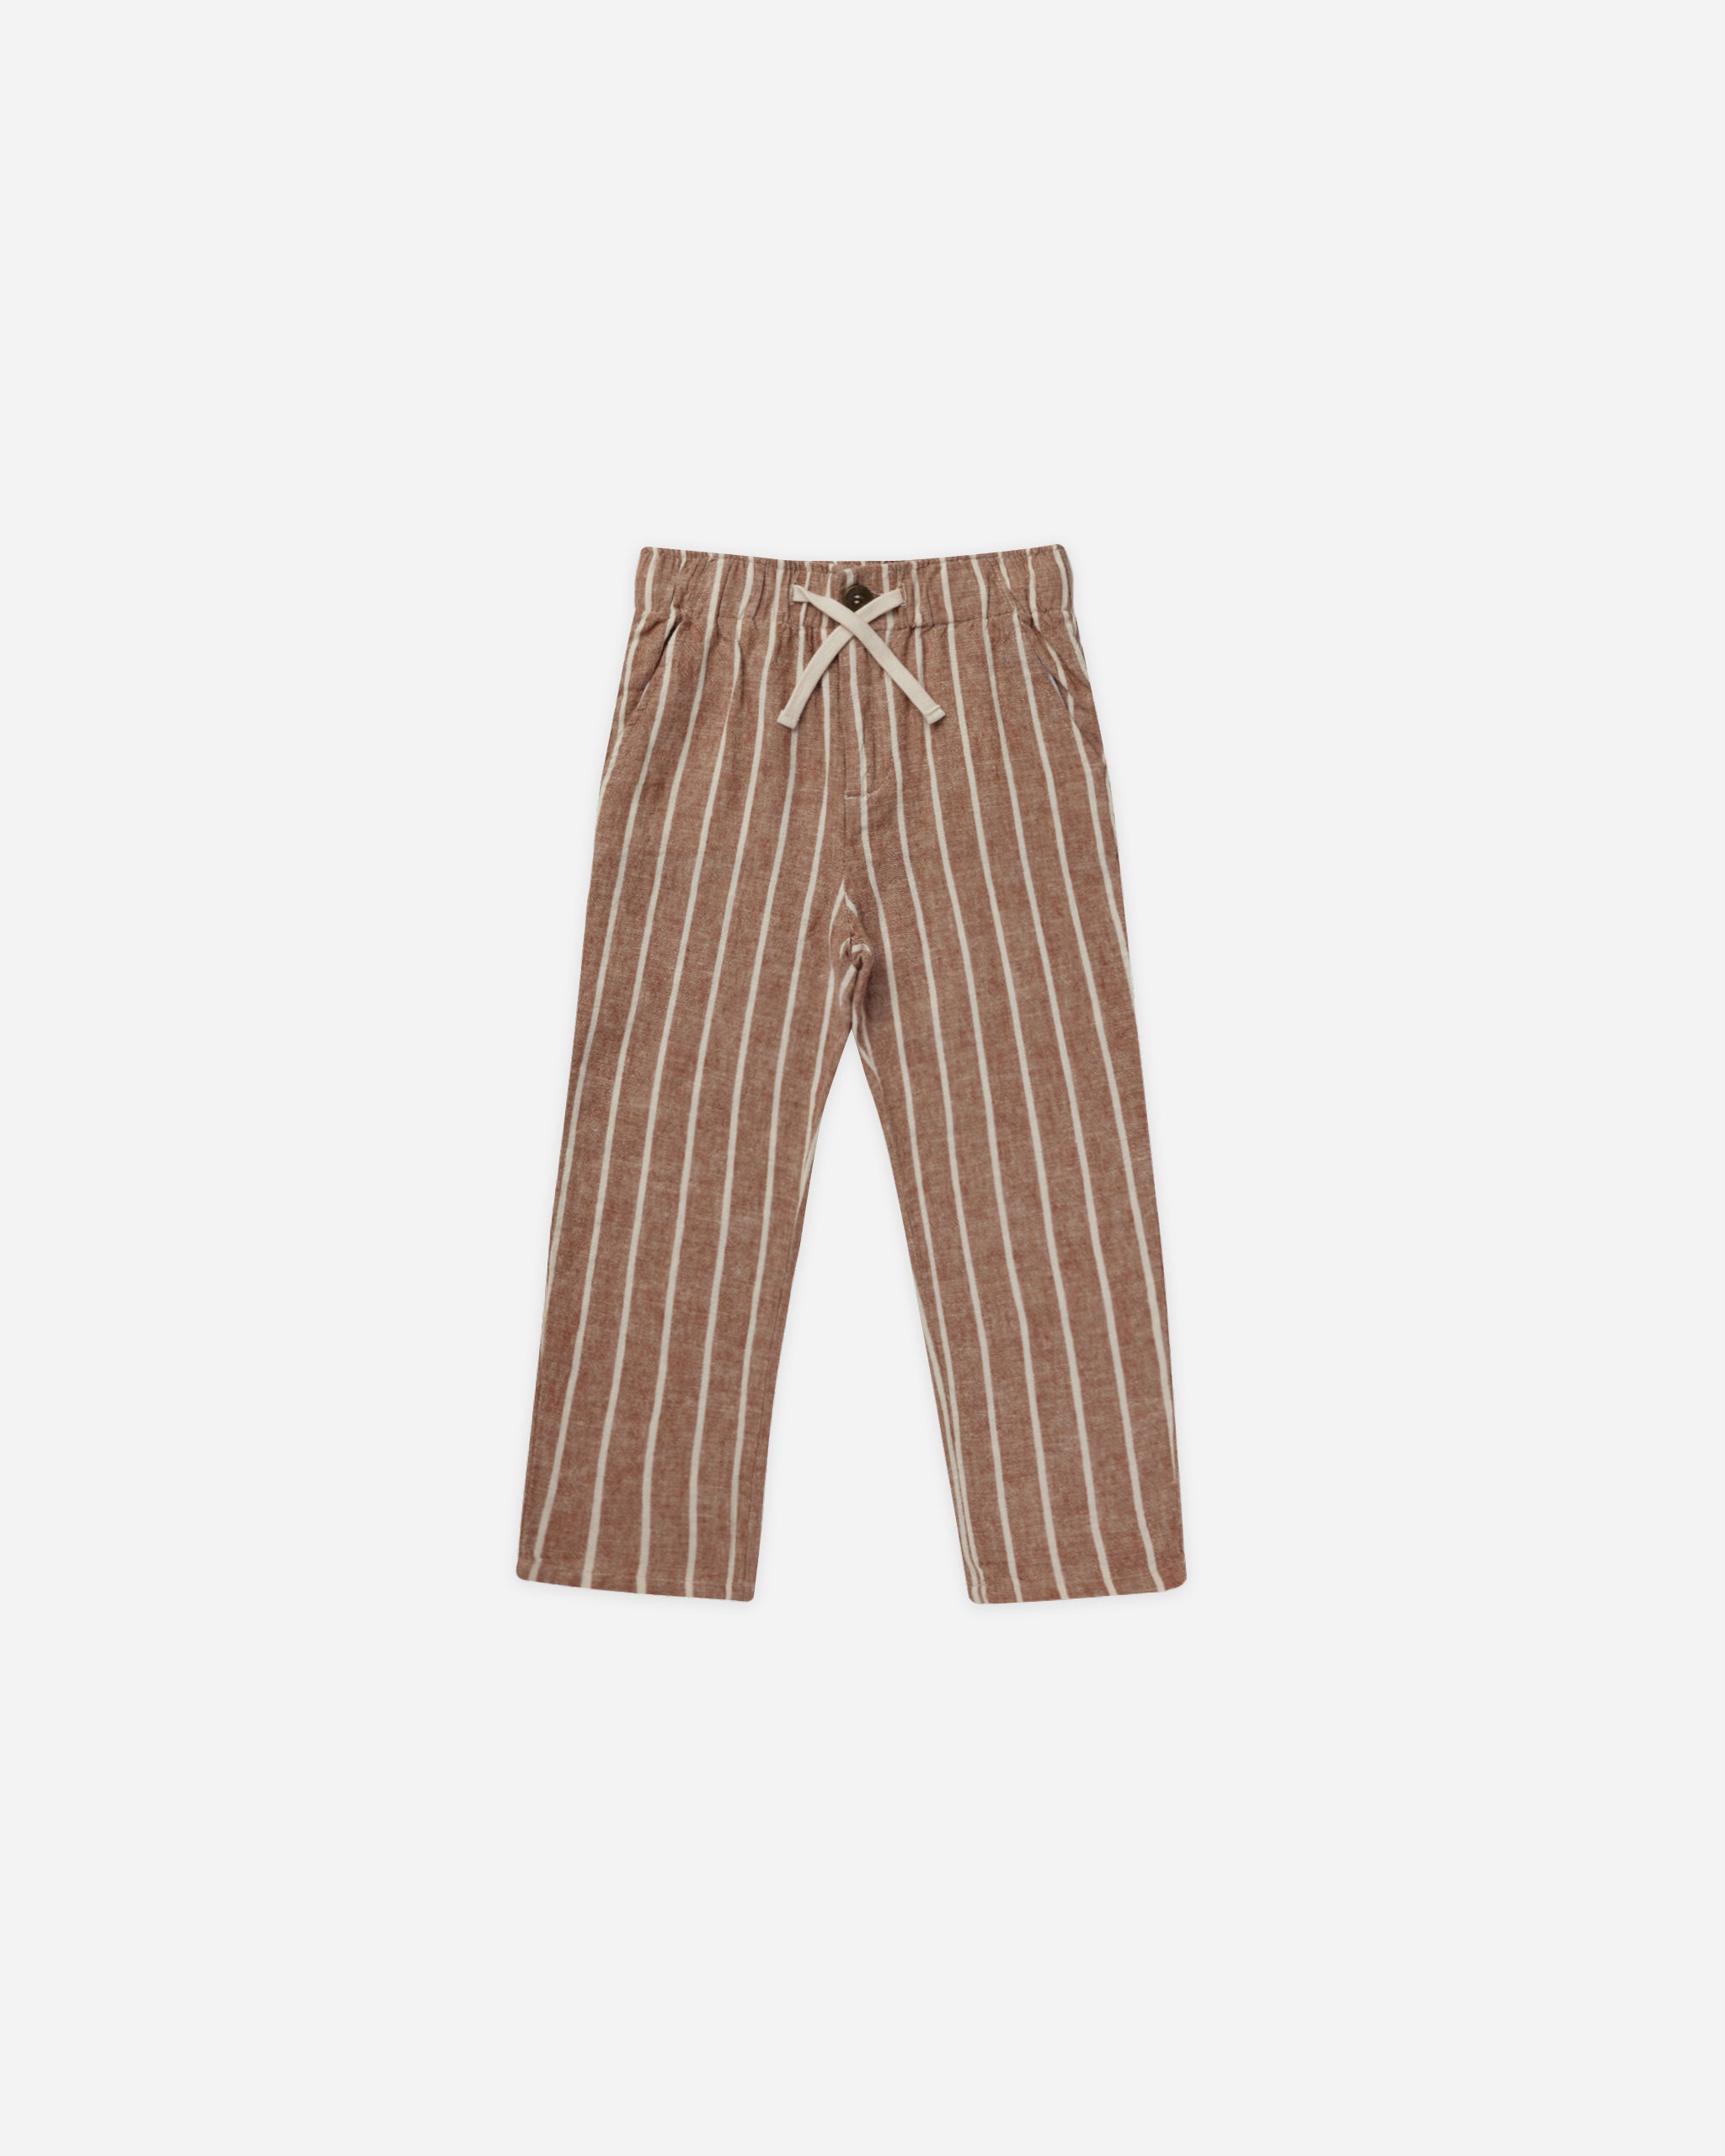 Kalen Pant || Cedar Pinstripe - Rylee + Cru | Kids Clothes | Trendy Baby Clothes | Modern Infant Outfits |